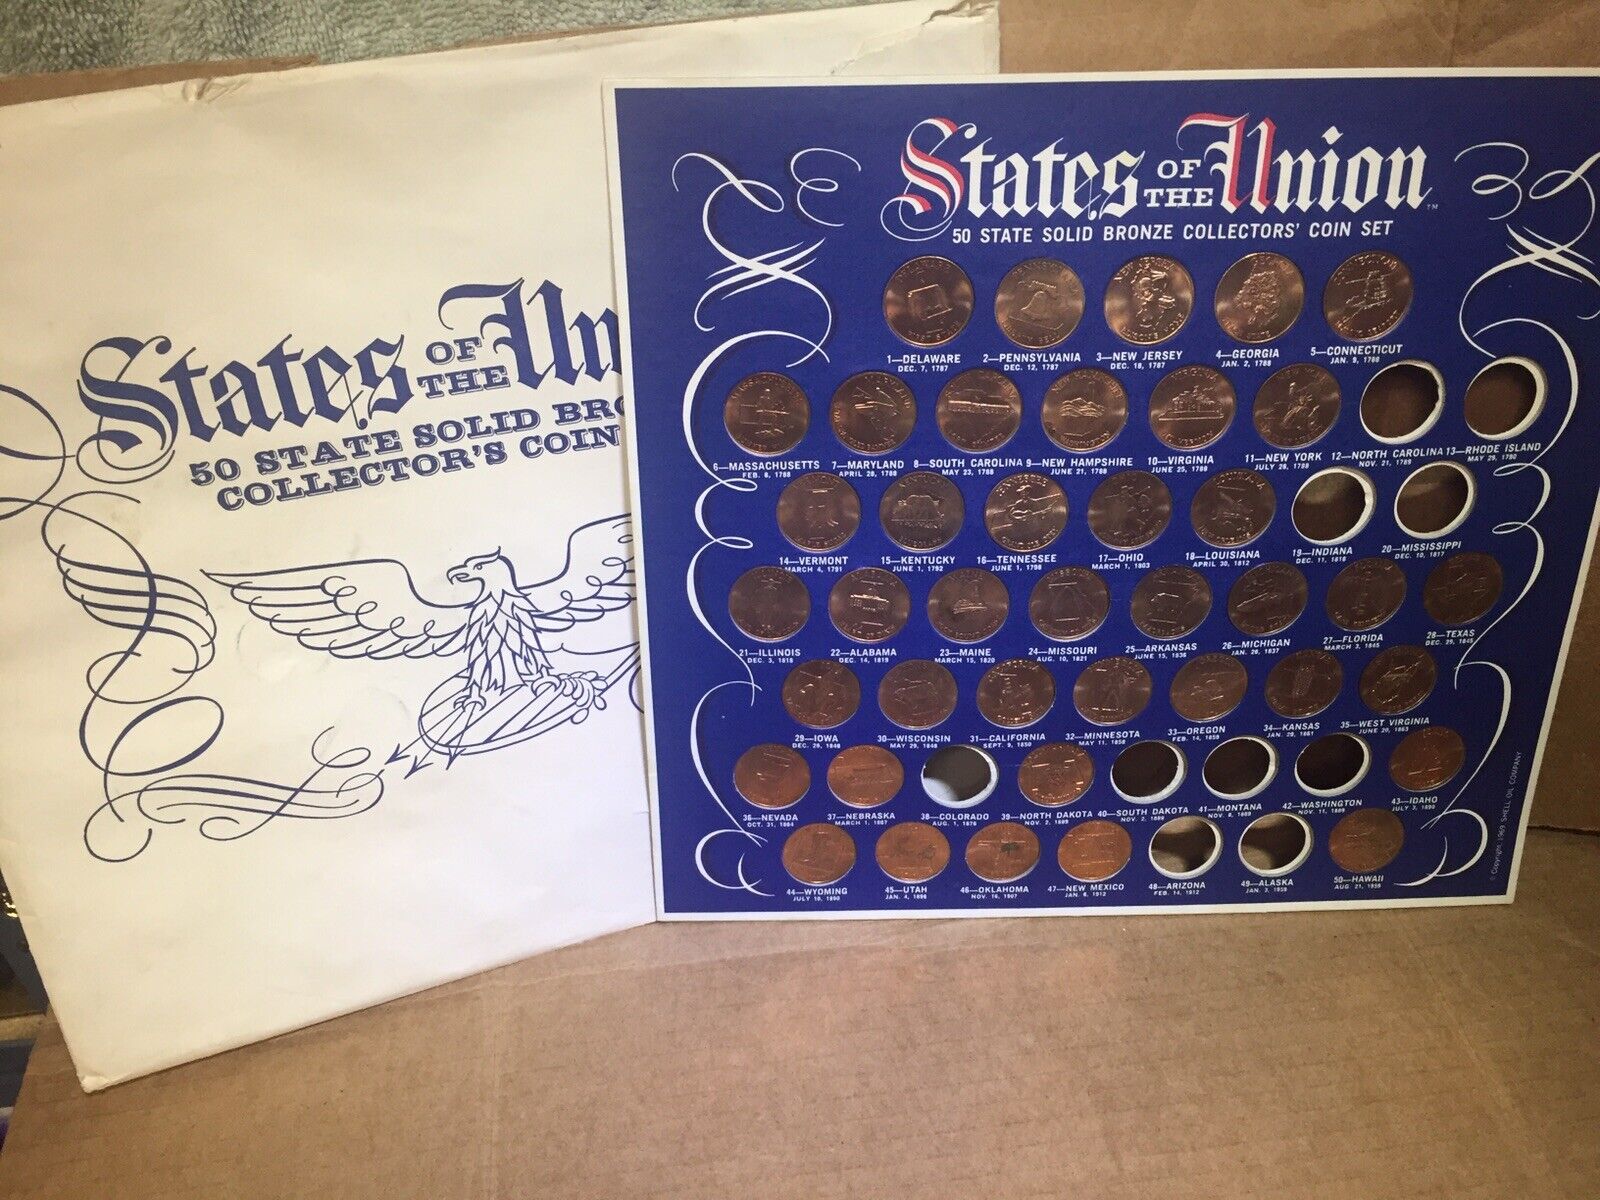 1969 Shell Oil States Of The Union 50 Solid Bronze Collectors Coin Set - parts 